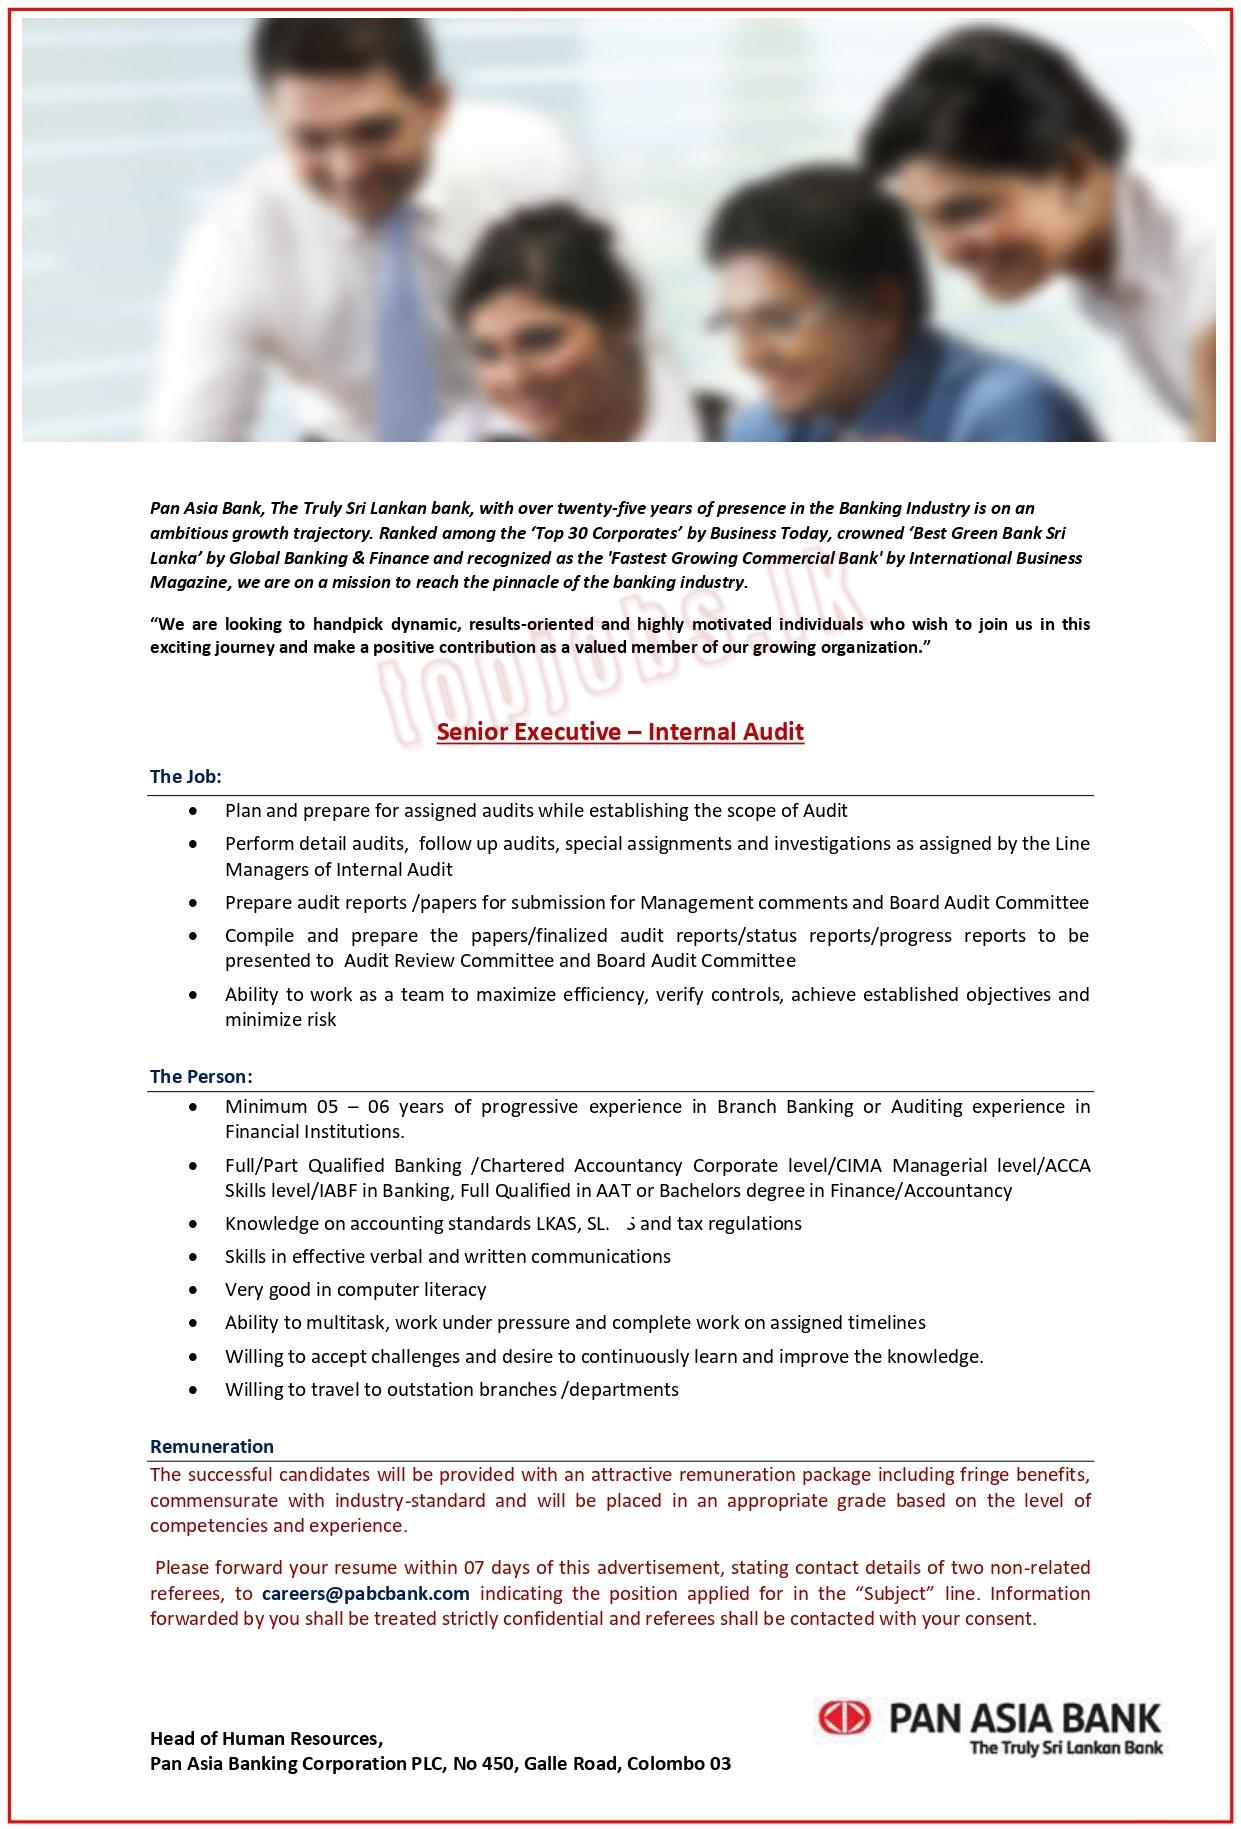 Executive of Internal Audit Vacancy in Pan Asia Banking Corporation